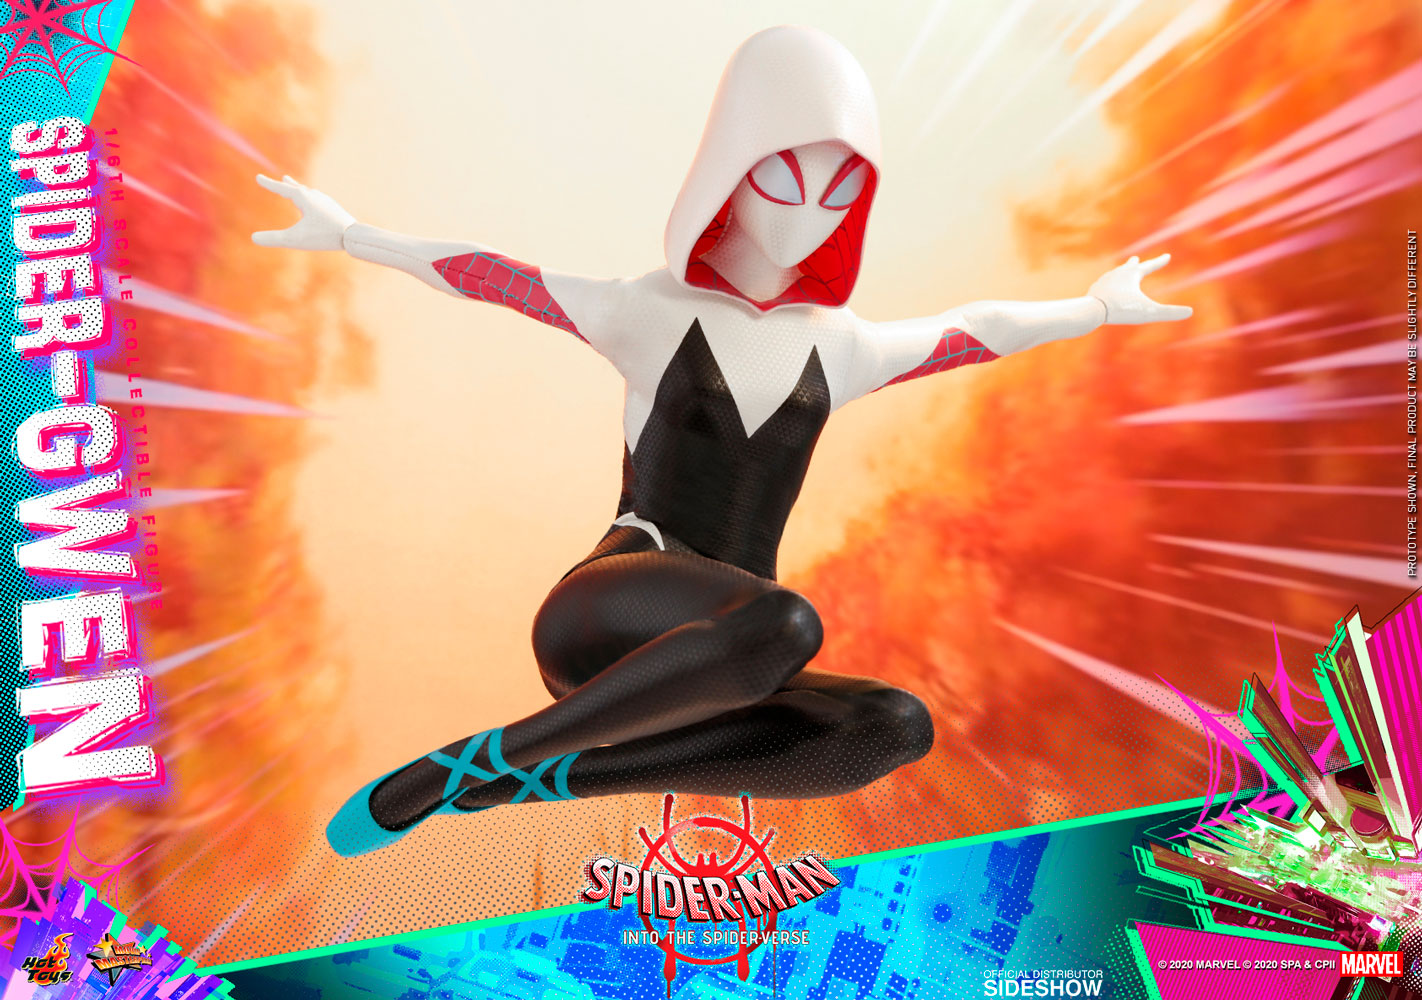 Hot Toys Spider-Gwen sixth scale action figure